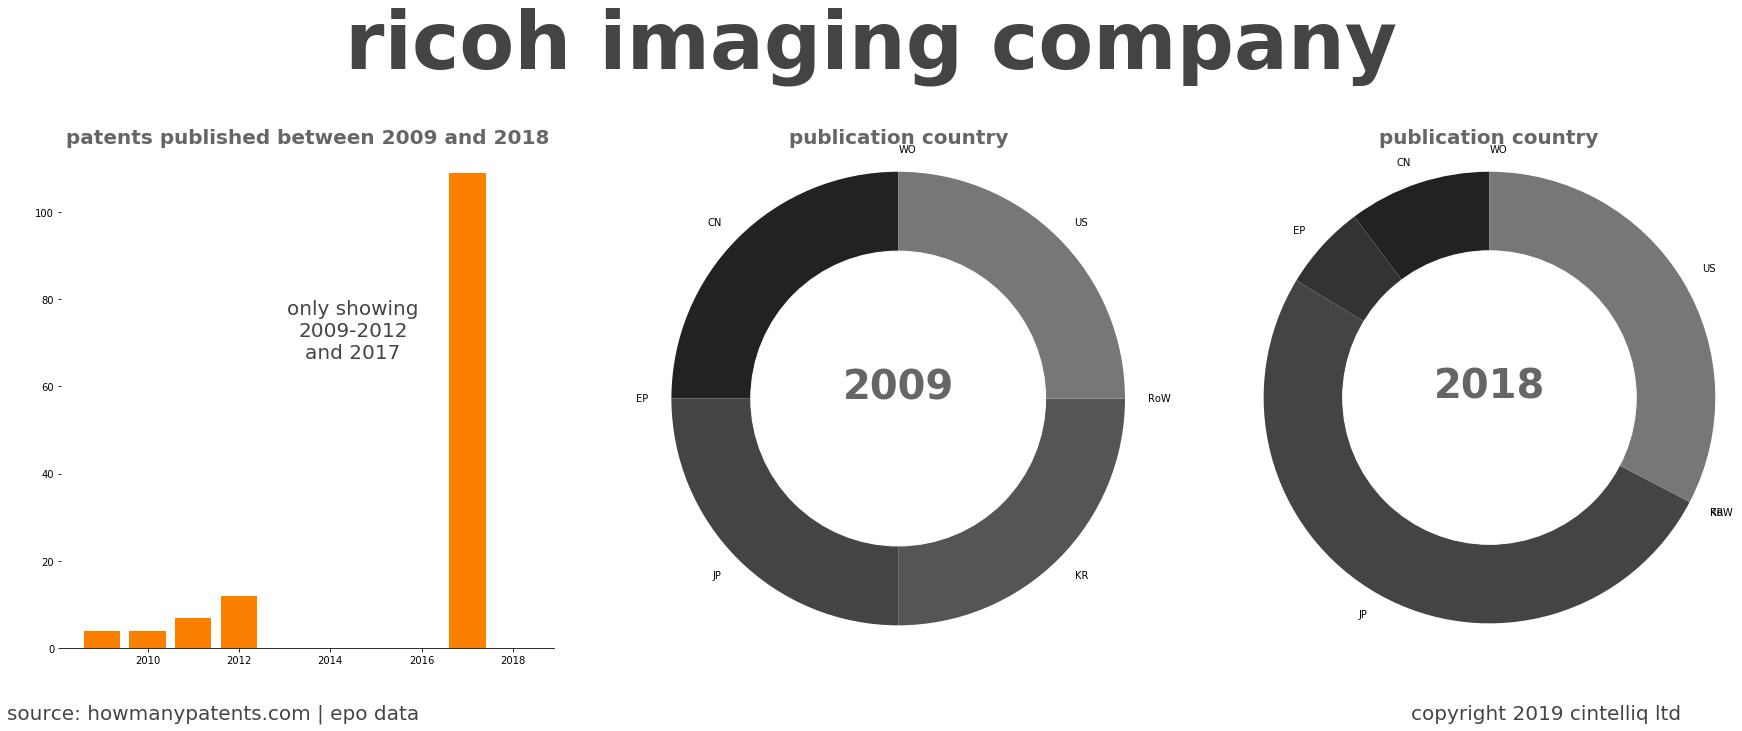 summary of patents for Ricoh Imaging Company